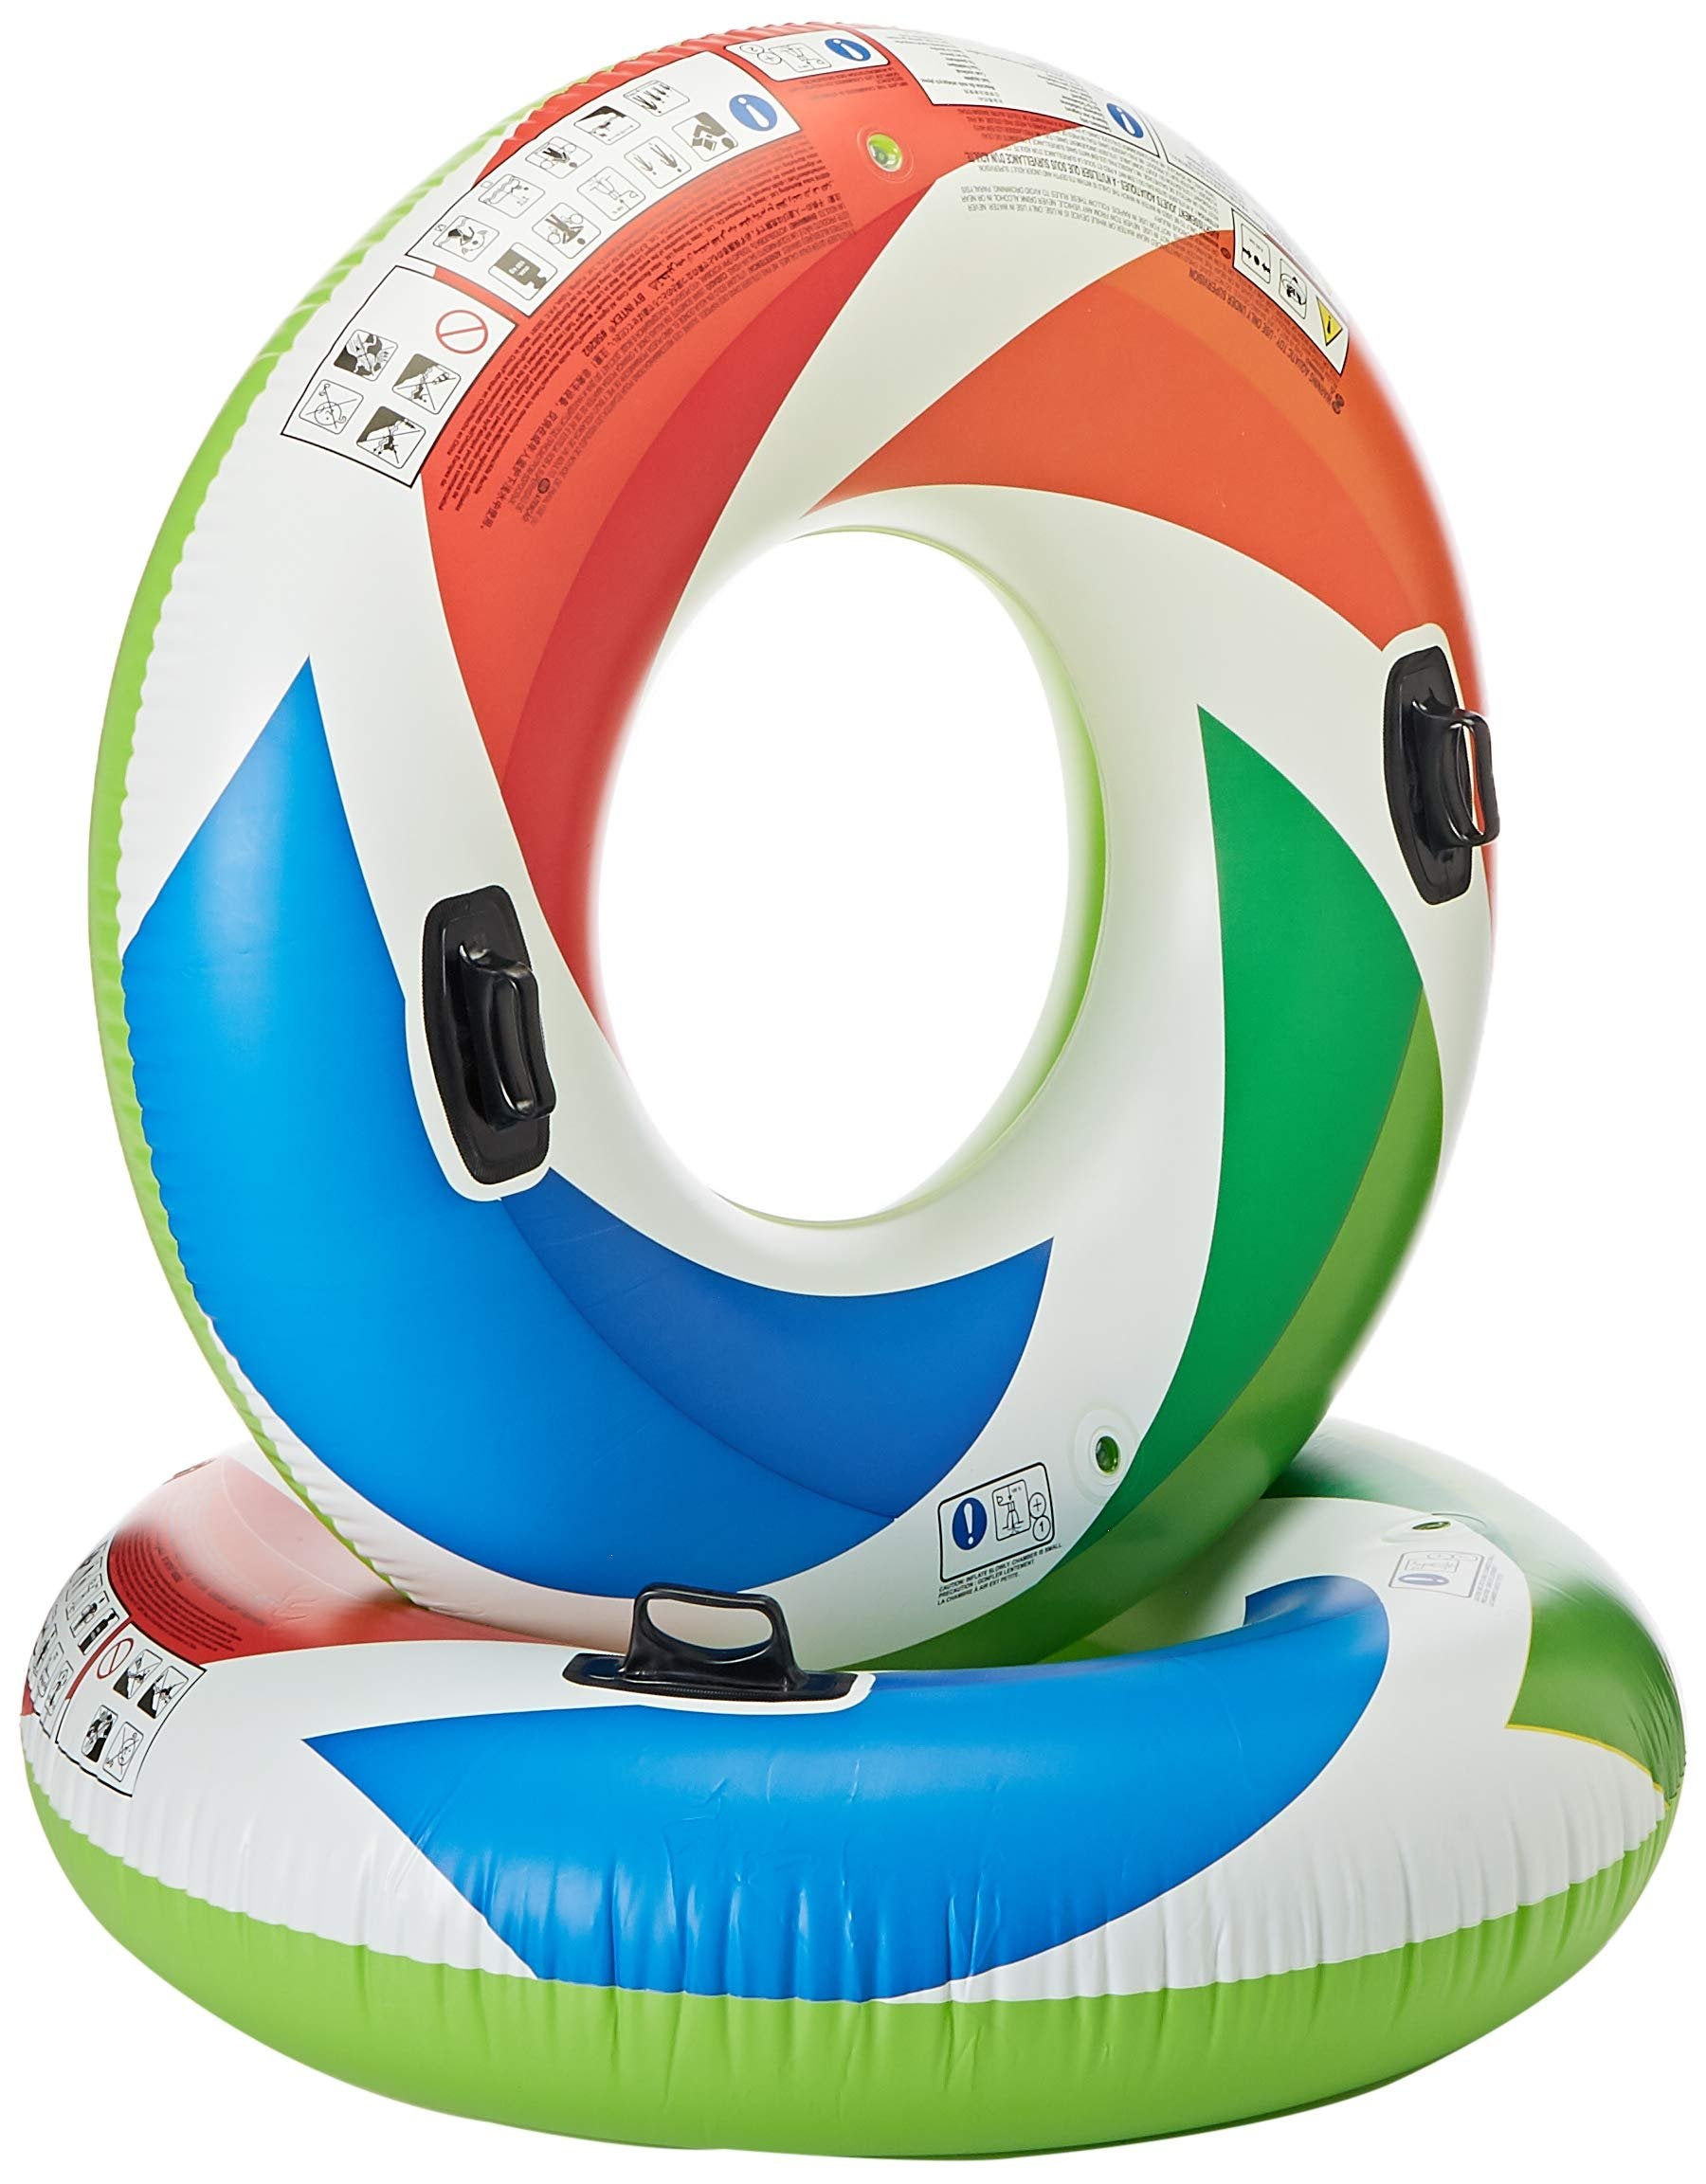 Intex Inflatable Color Whirl Floating Tube Raft w/ Handles (Set of 2) 48in 58202EP